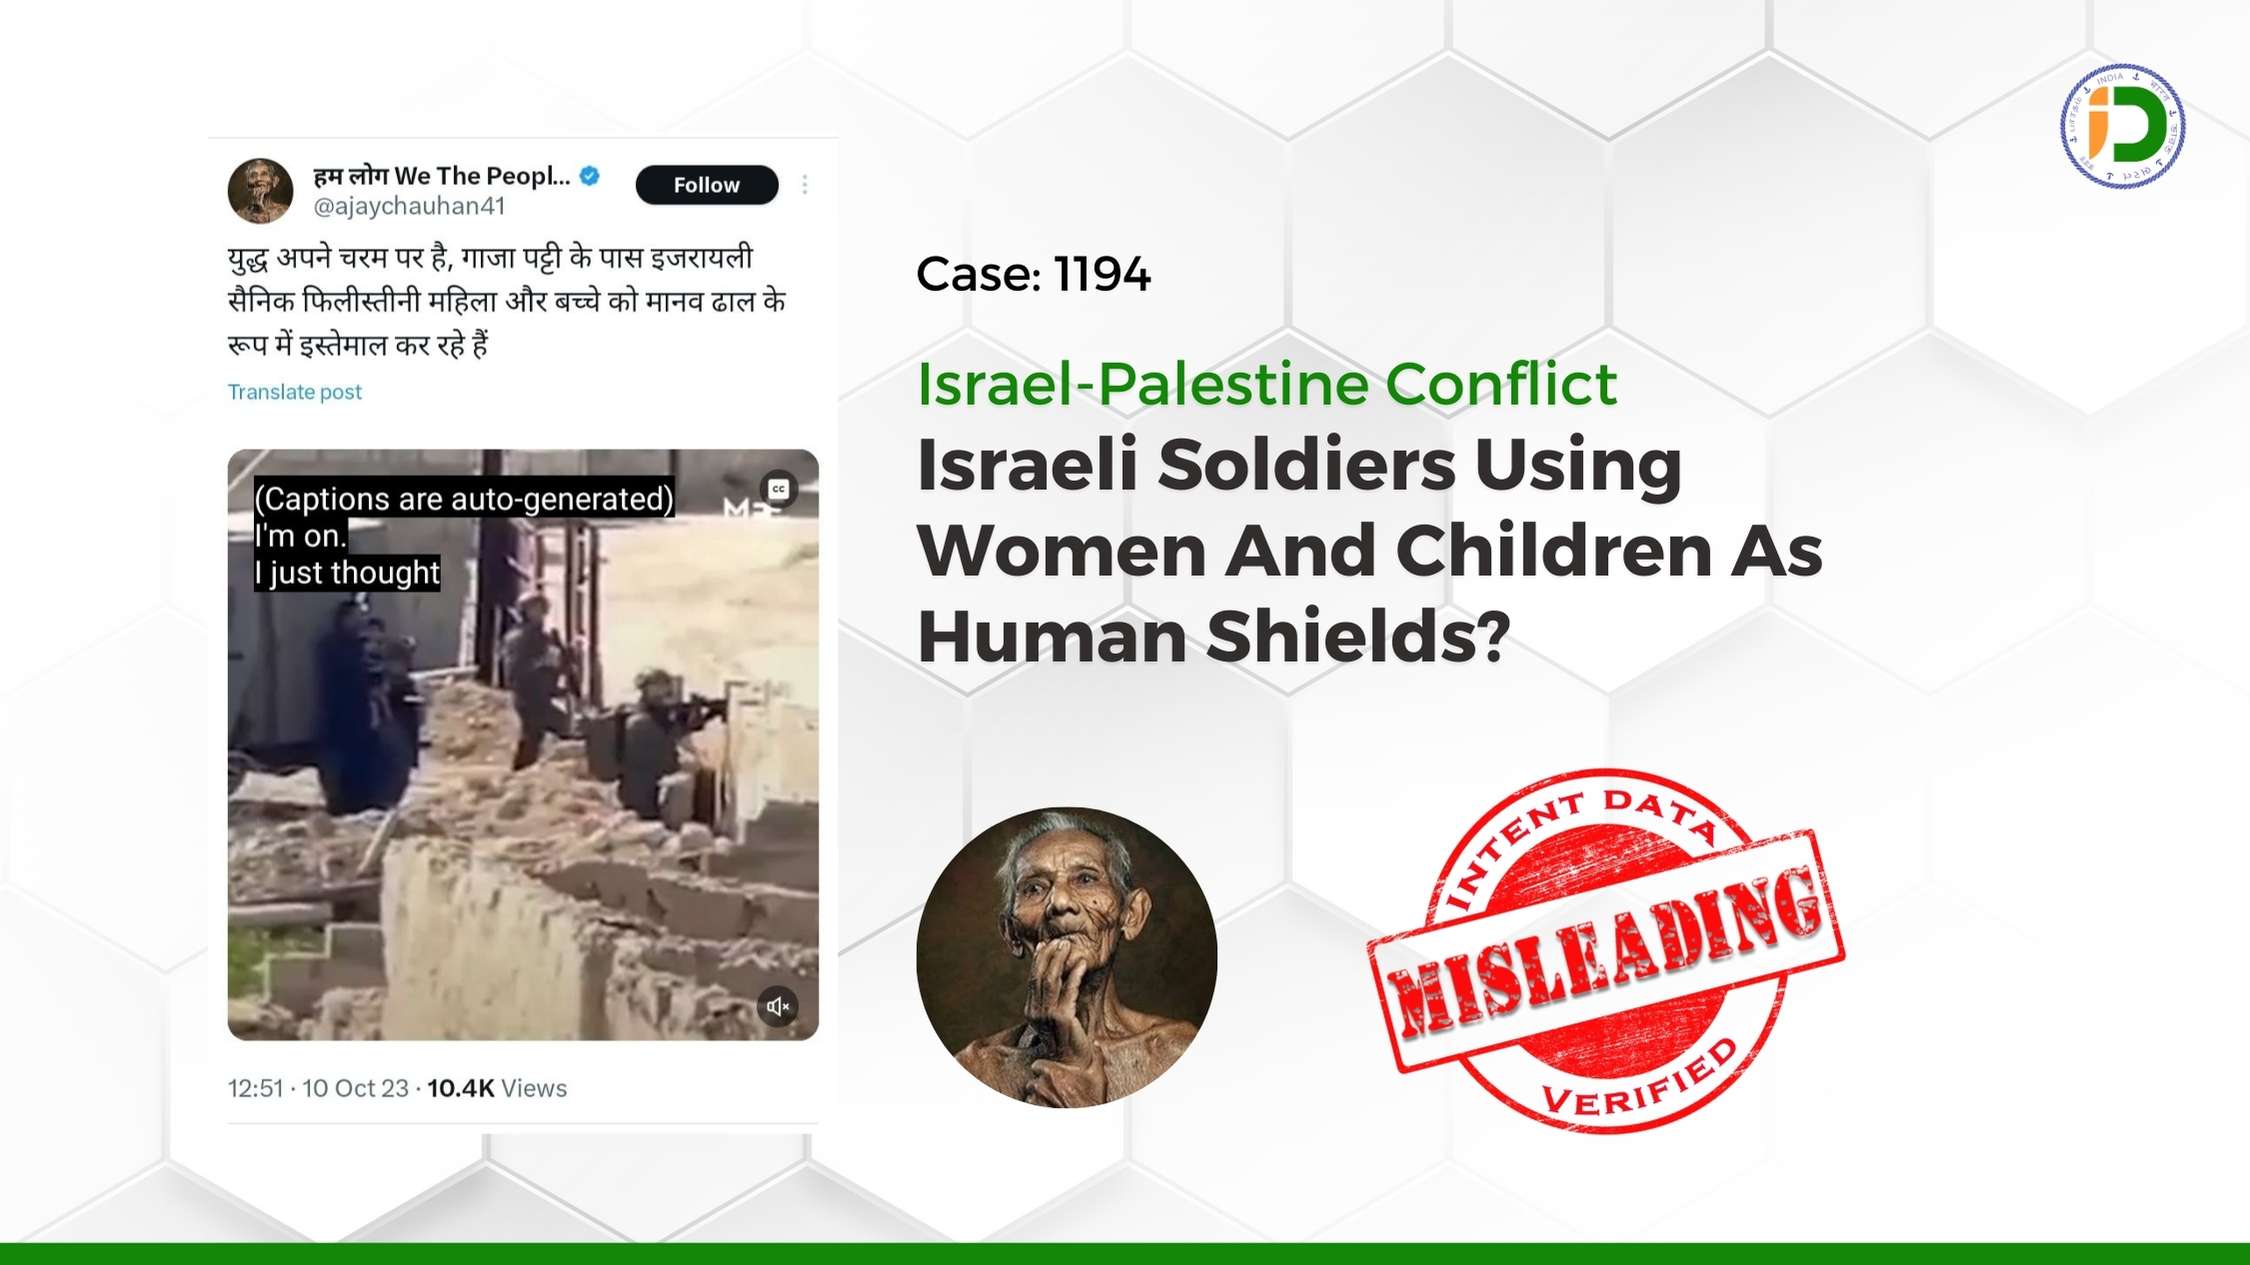 Israel-Palestine Conflict — Israeli Soldiers Using Women And Children As Human Shields? Fact-Check